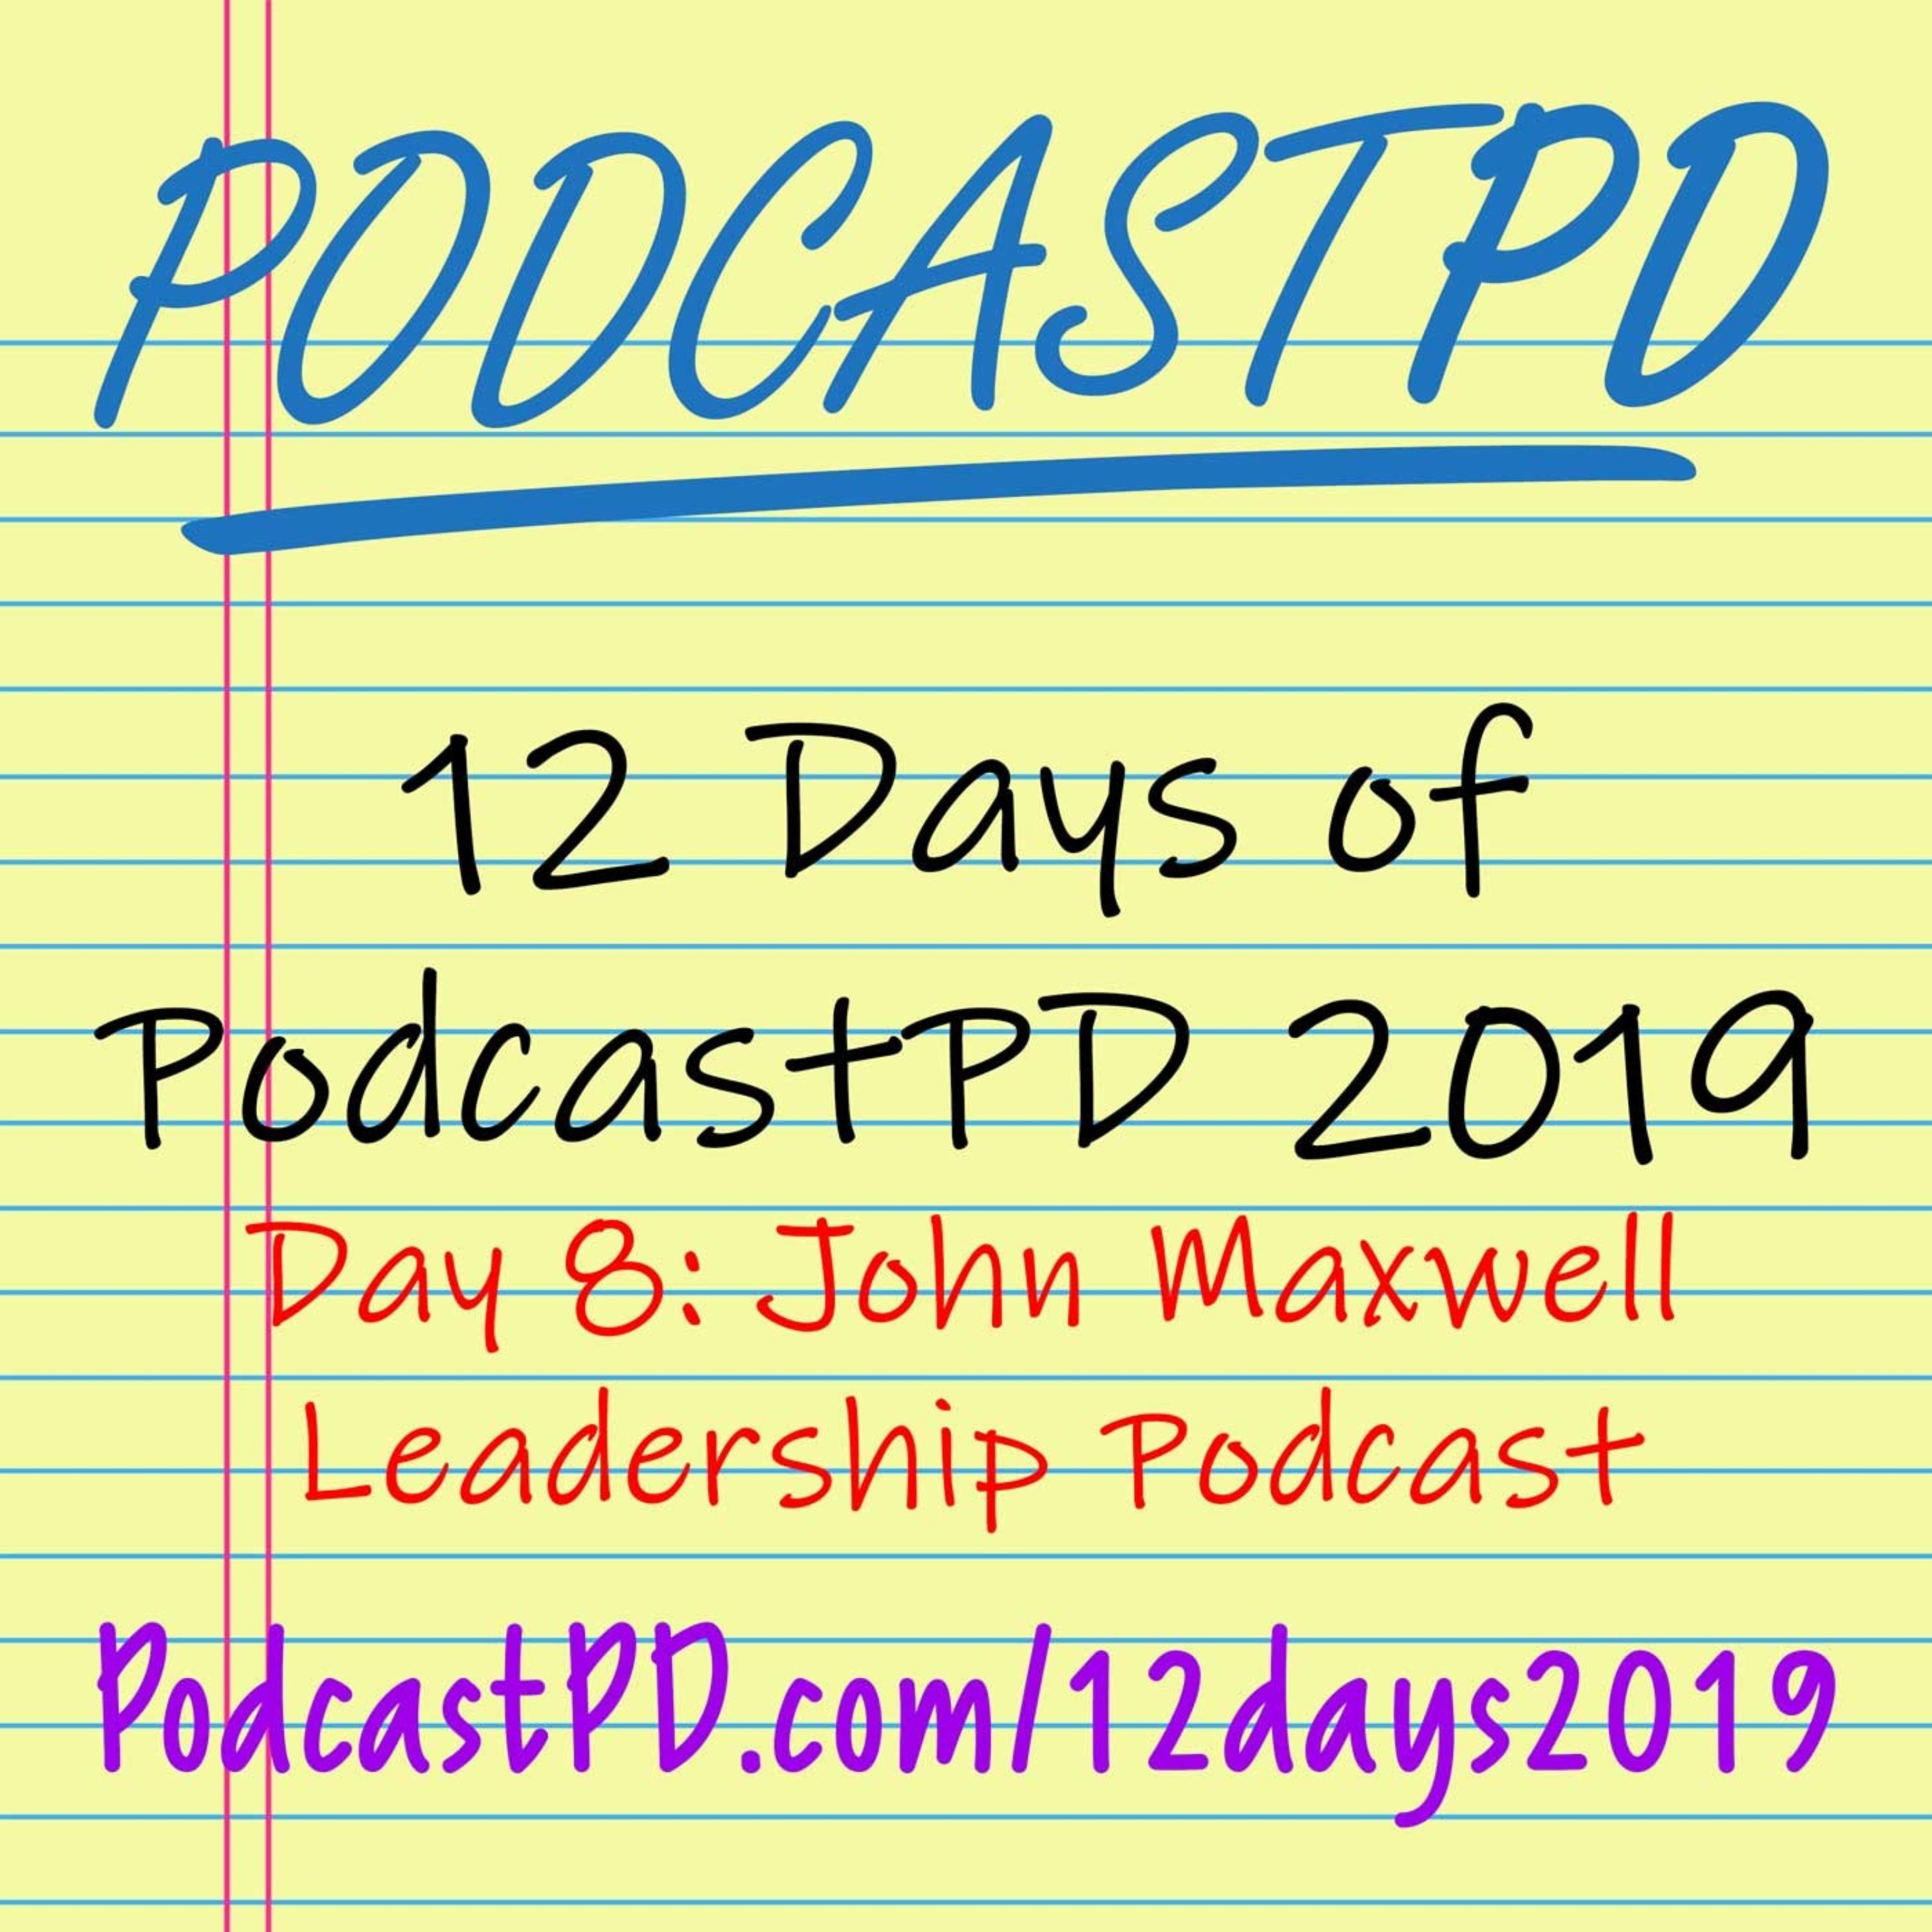 The John Maxwell Leadership Podcast - 12 Days of PodcastPD 2019 Image